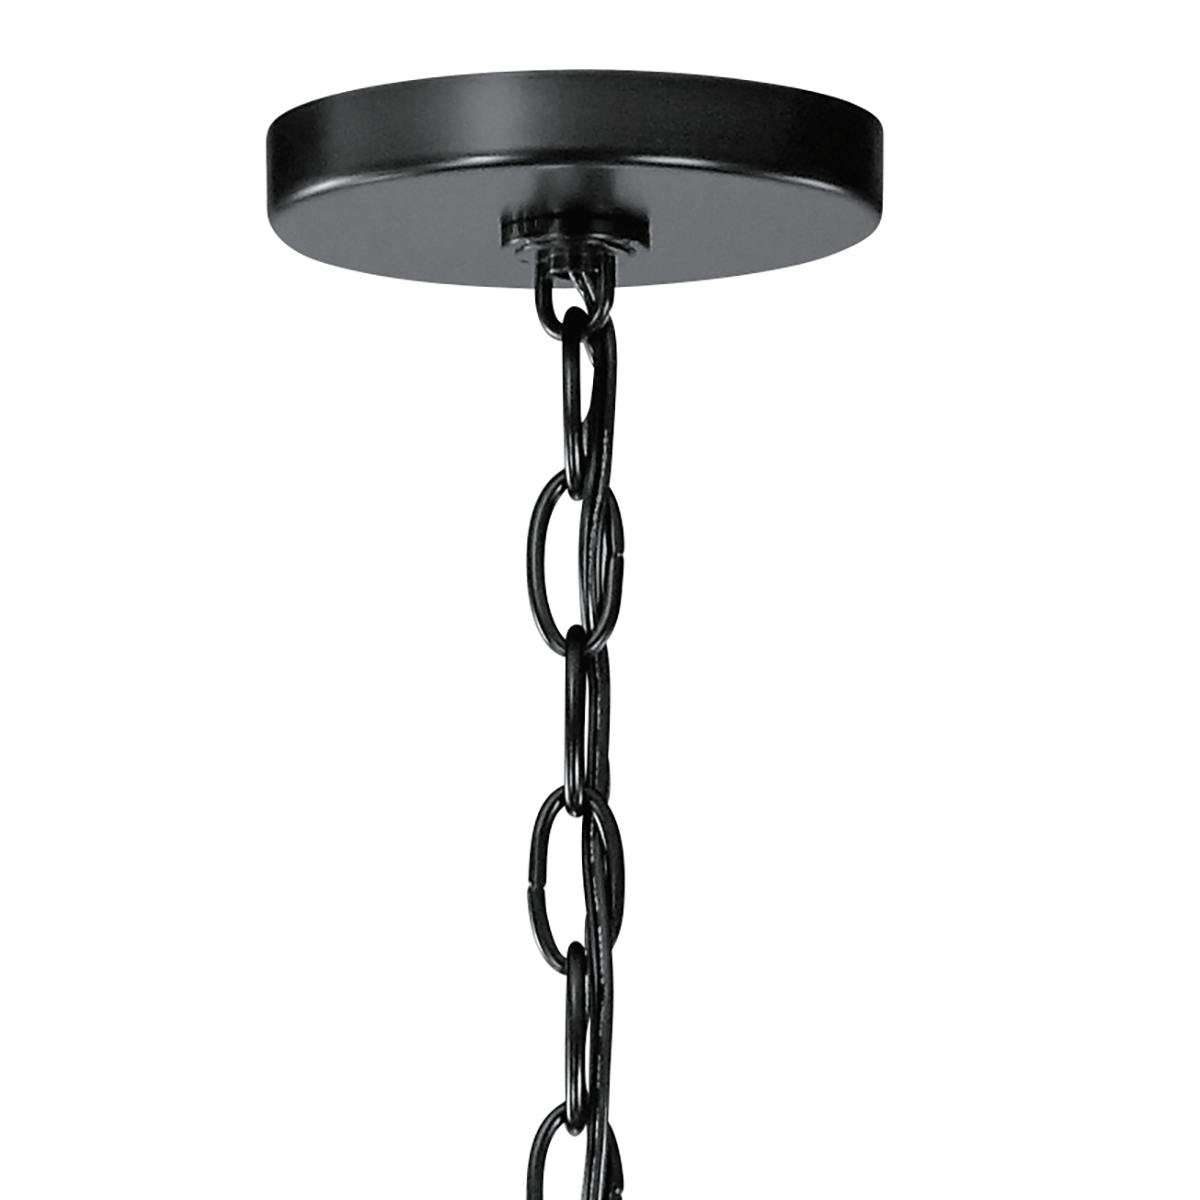 Canopy for the Valserrano 31.75" 2 Tier Chandelier Black on a white background